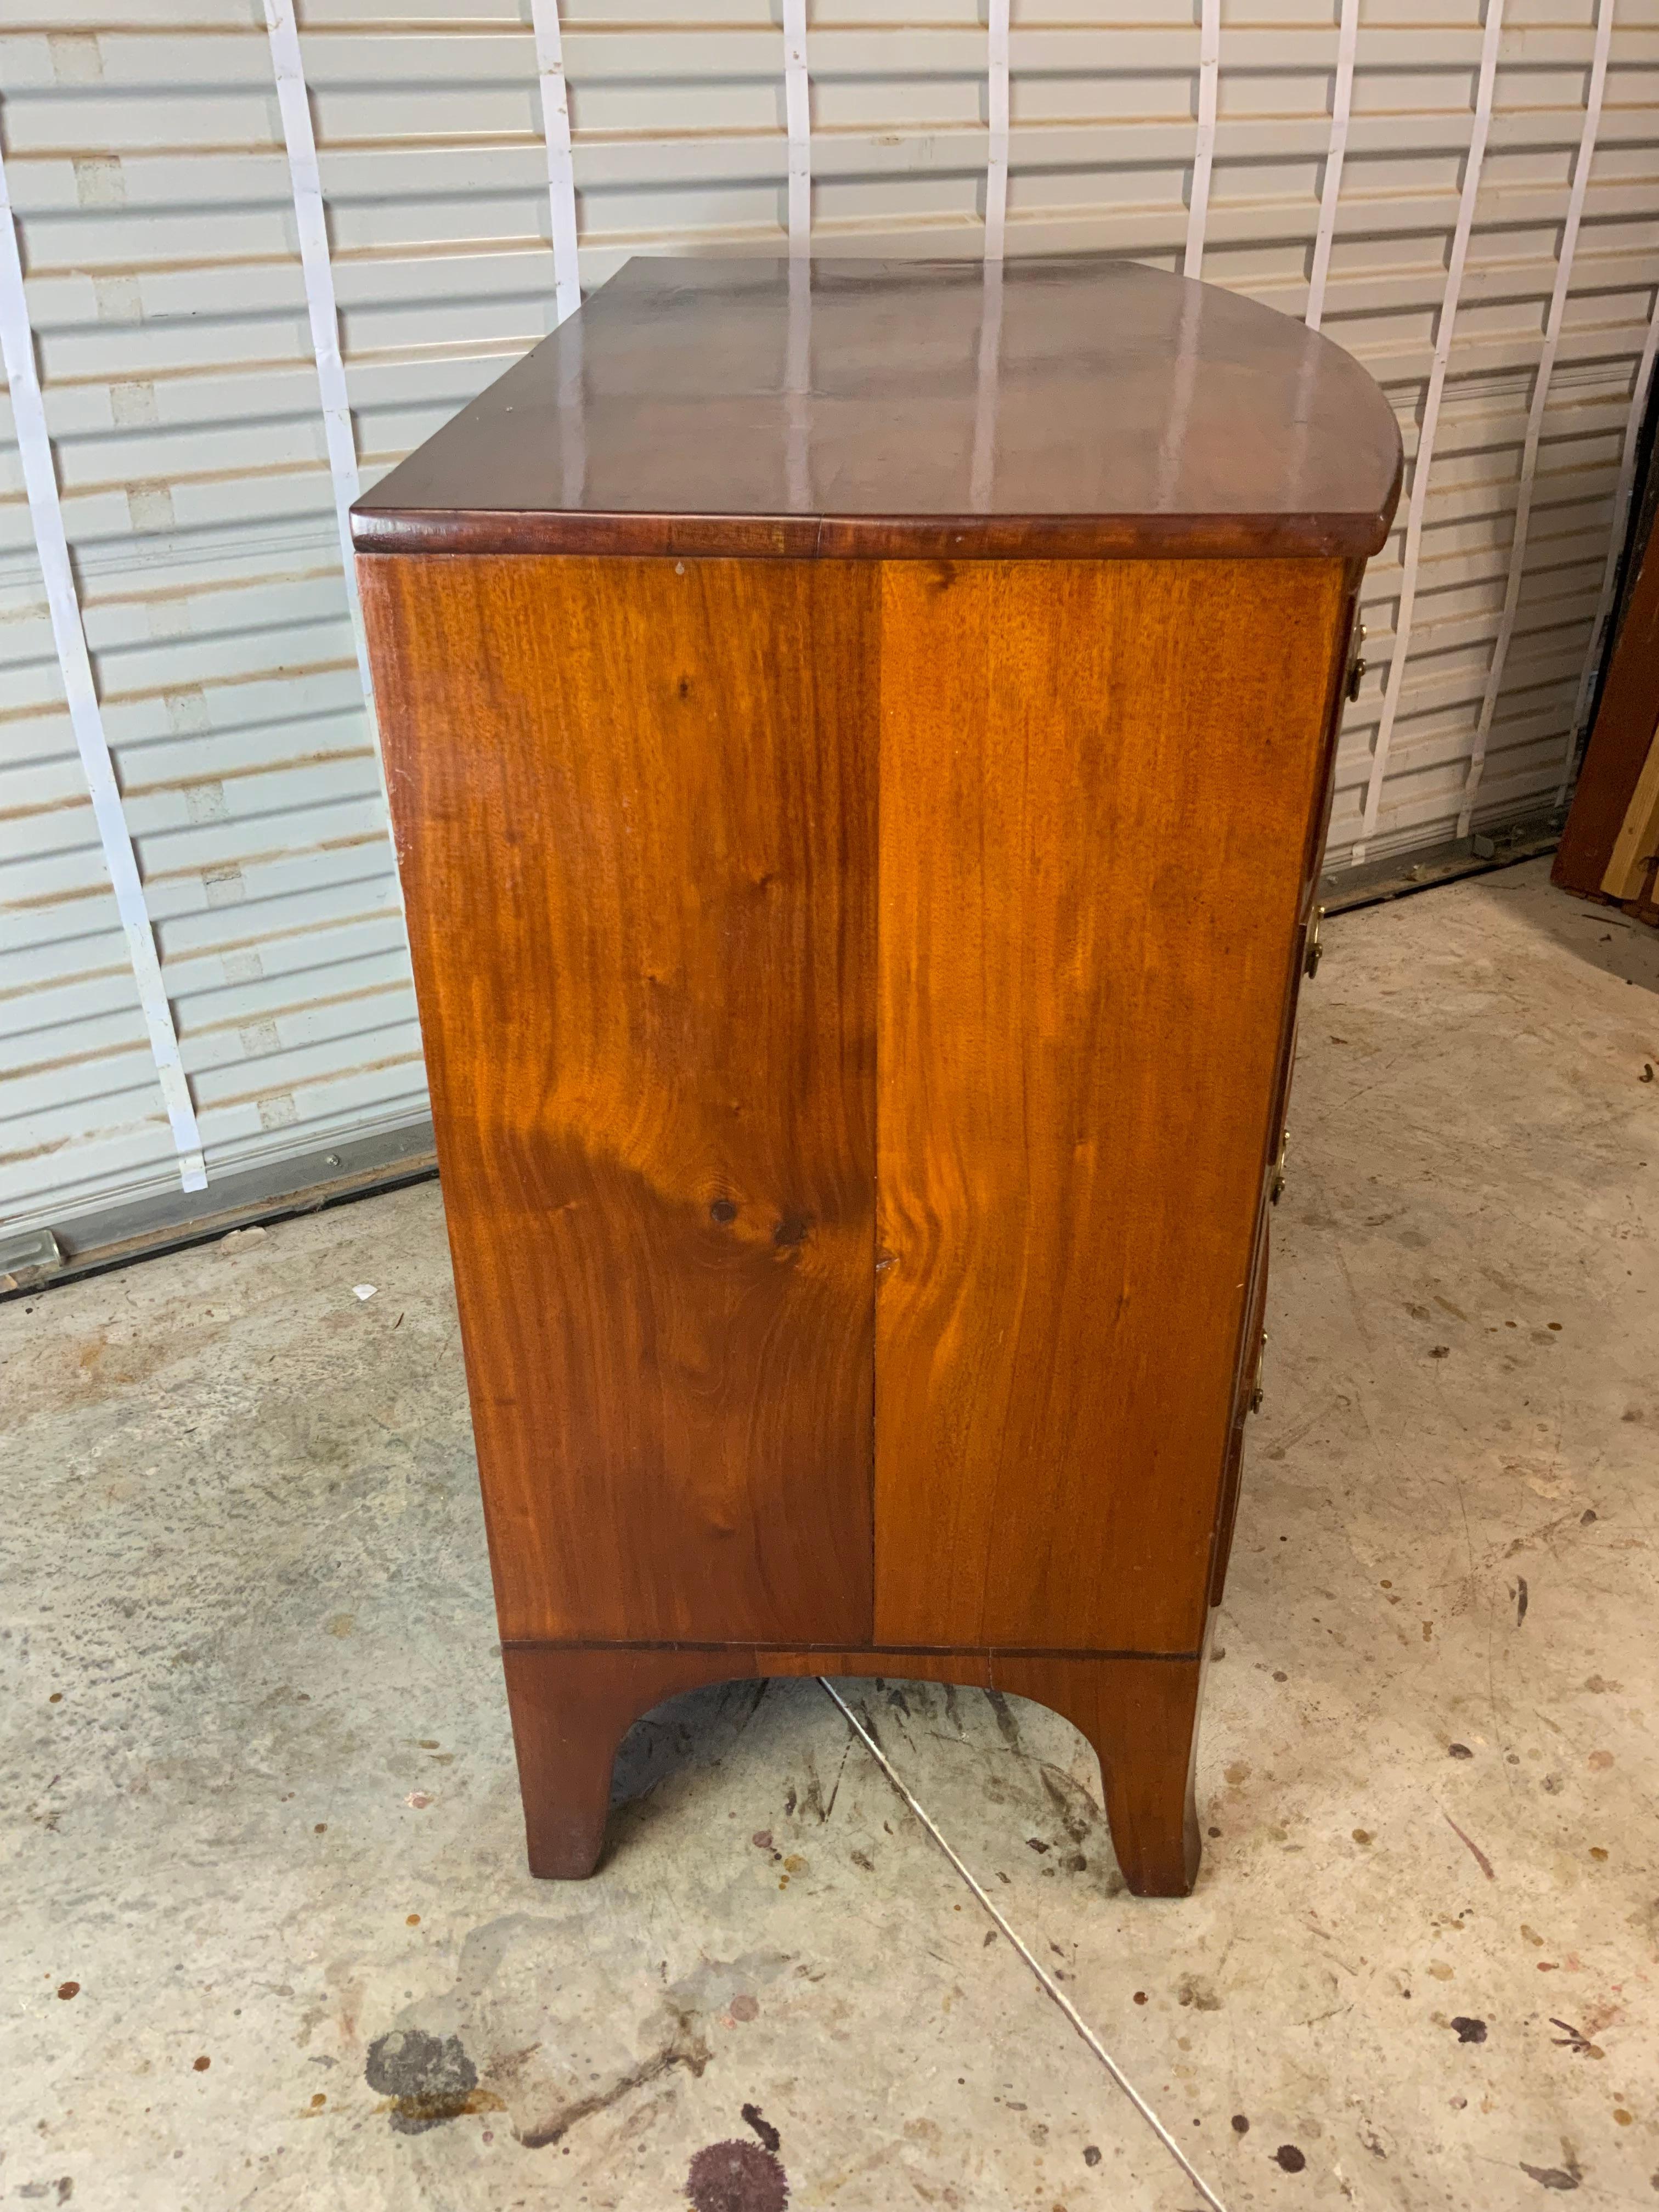 A very nice and clean Federal Mahogany Hepplewhite chest with cock beaded drawers and resting on a tall French foot.  Very good condition older refinish with a great color and patina to the aged Mahogany.  Older pulls in the original hardware holes.